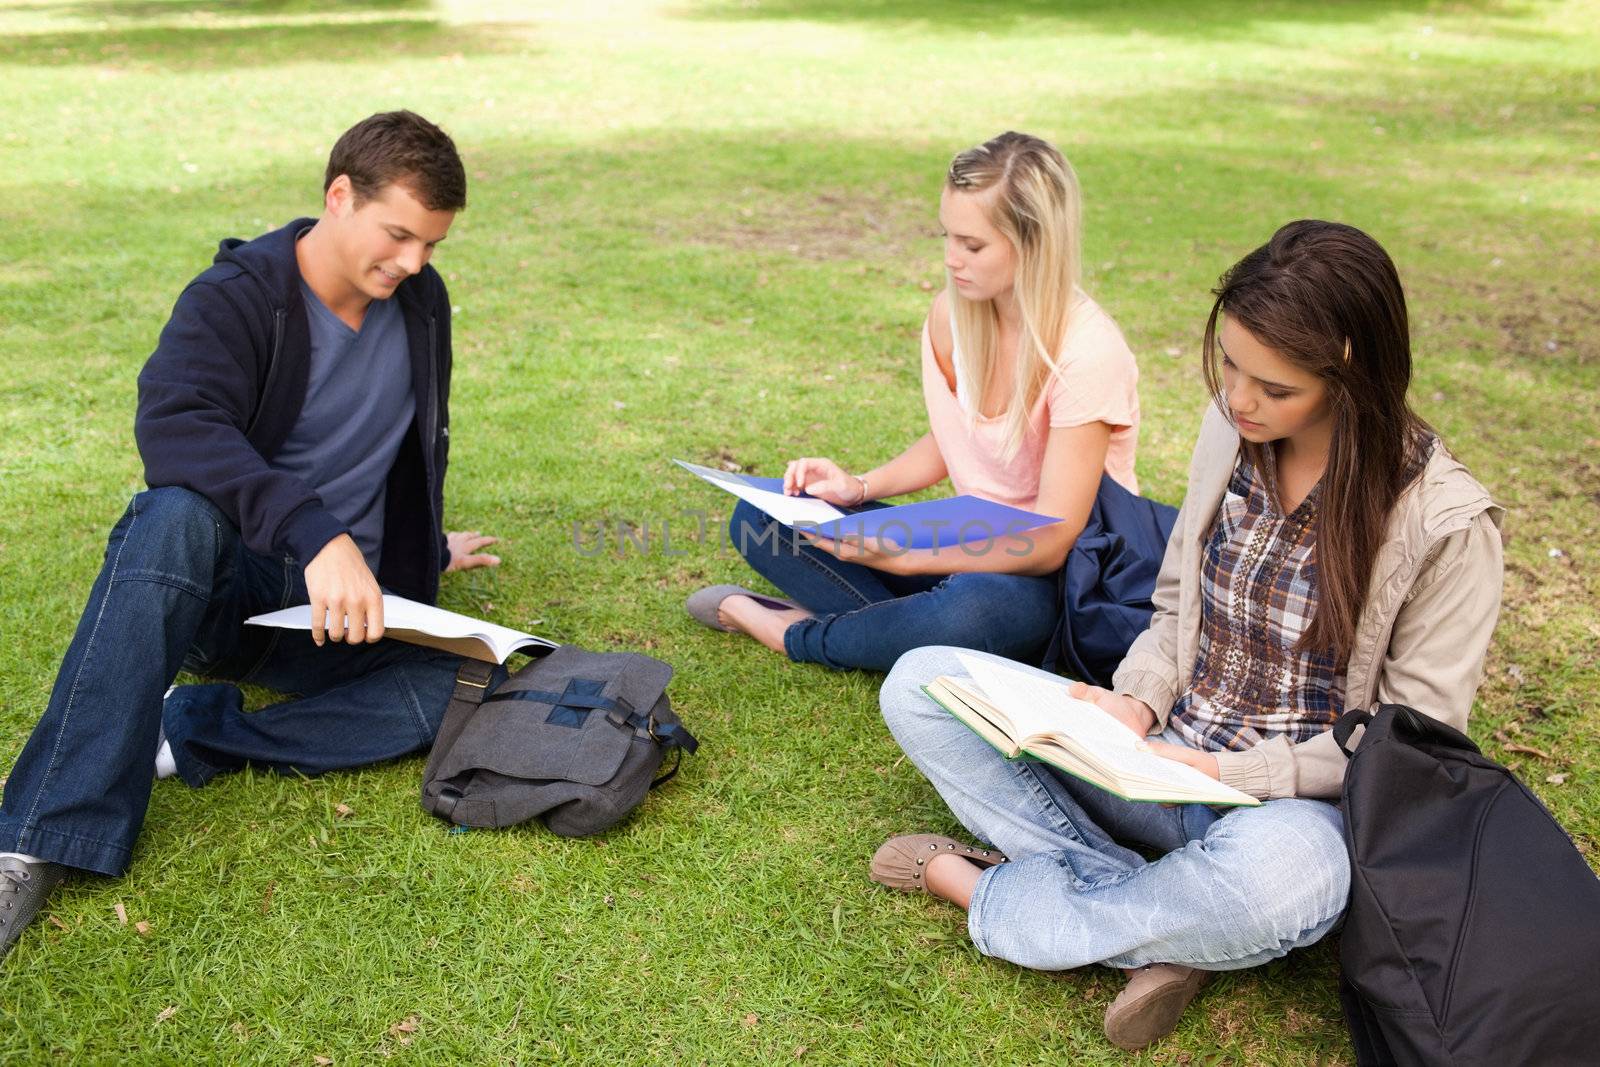 Three students studying together in a park